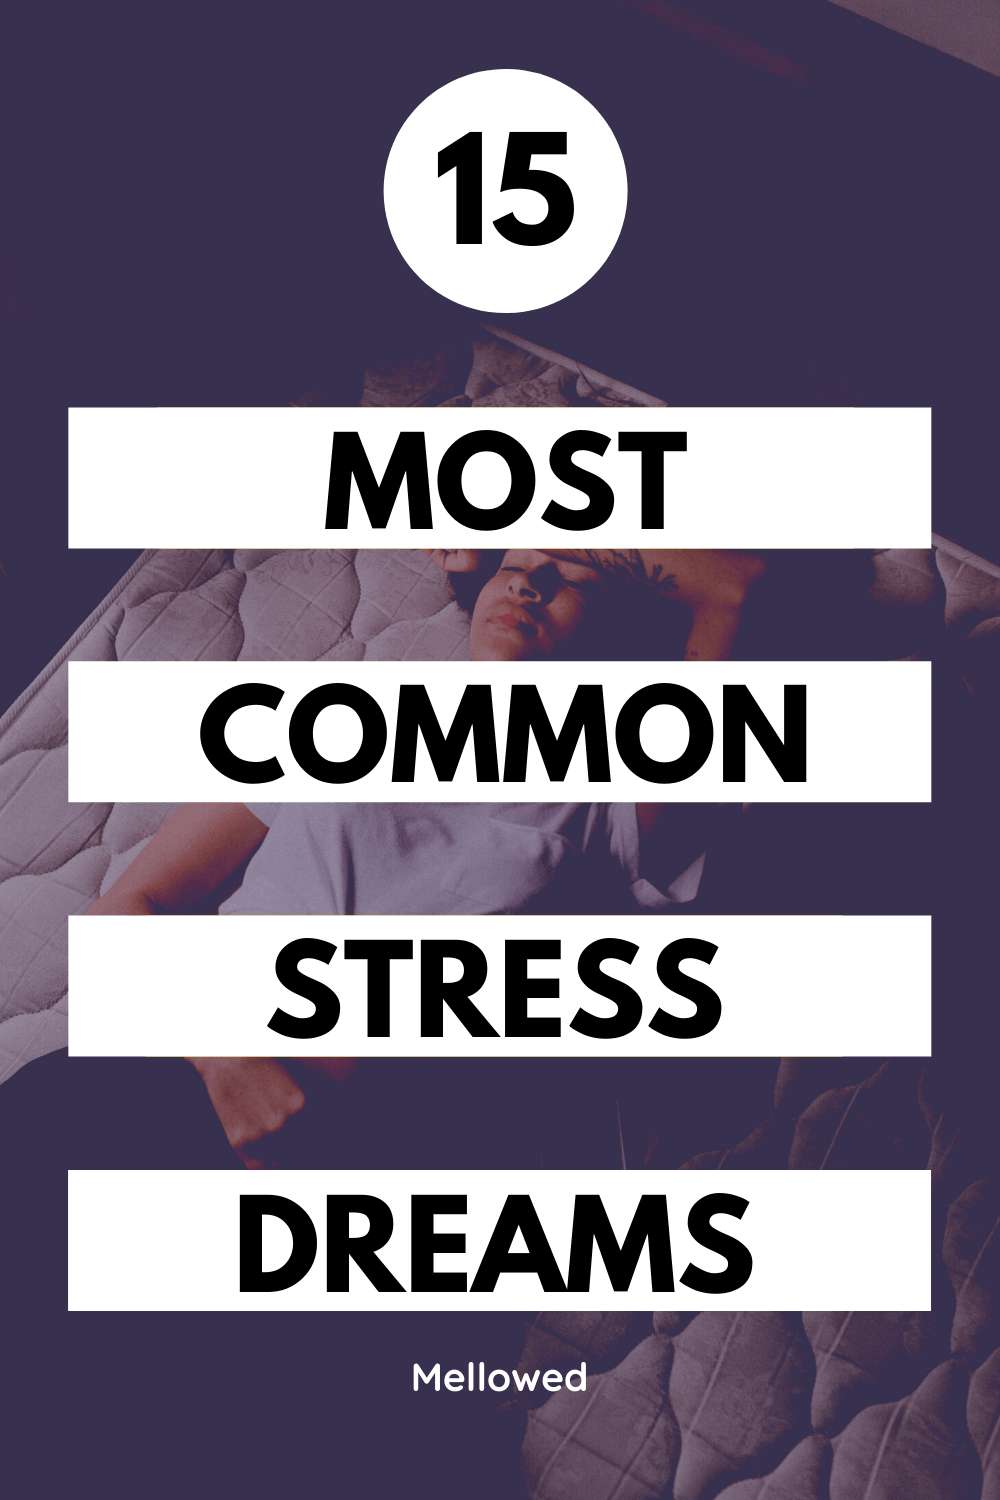 stress dreams meaning - pin